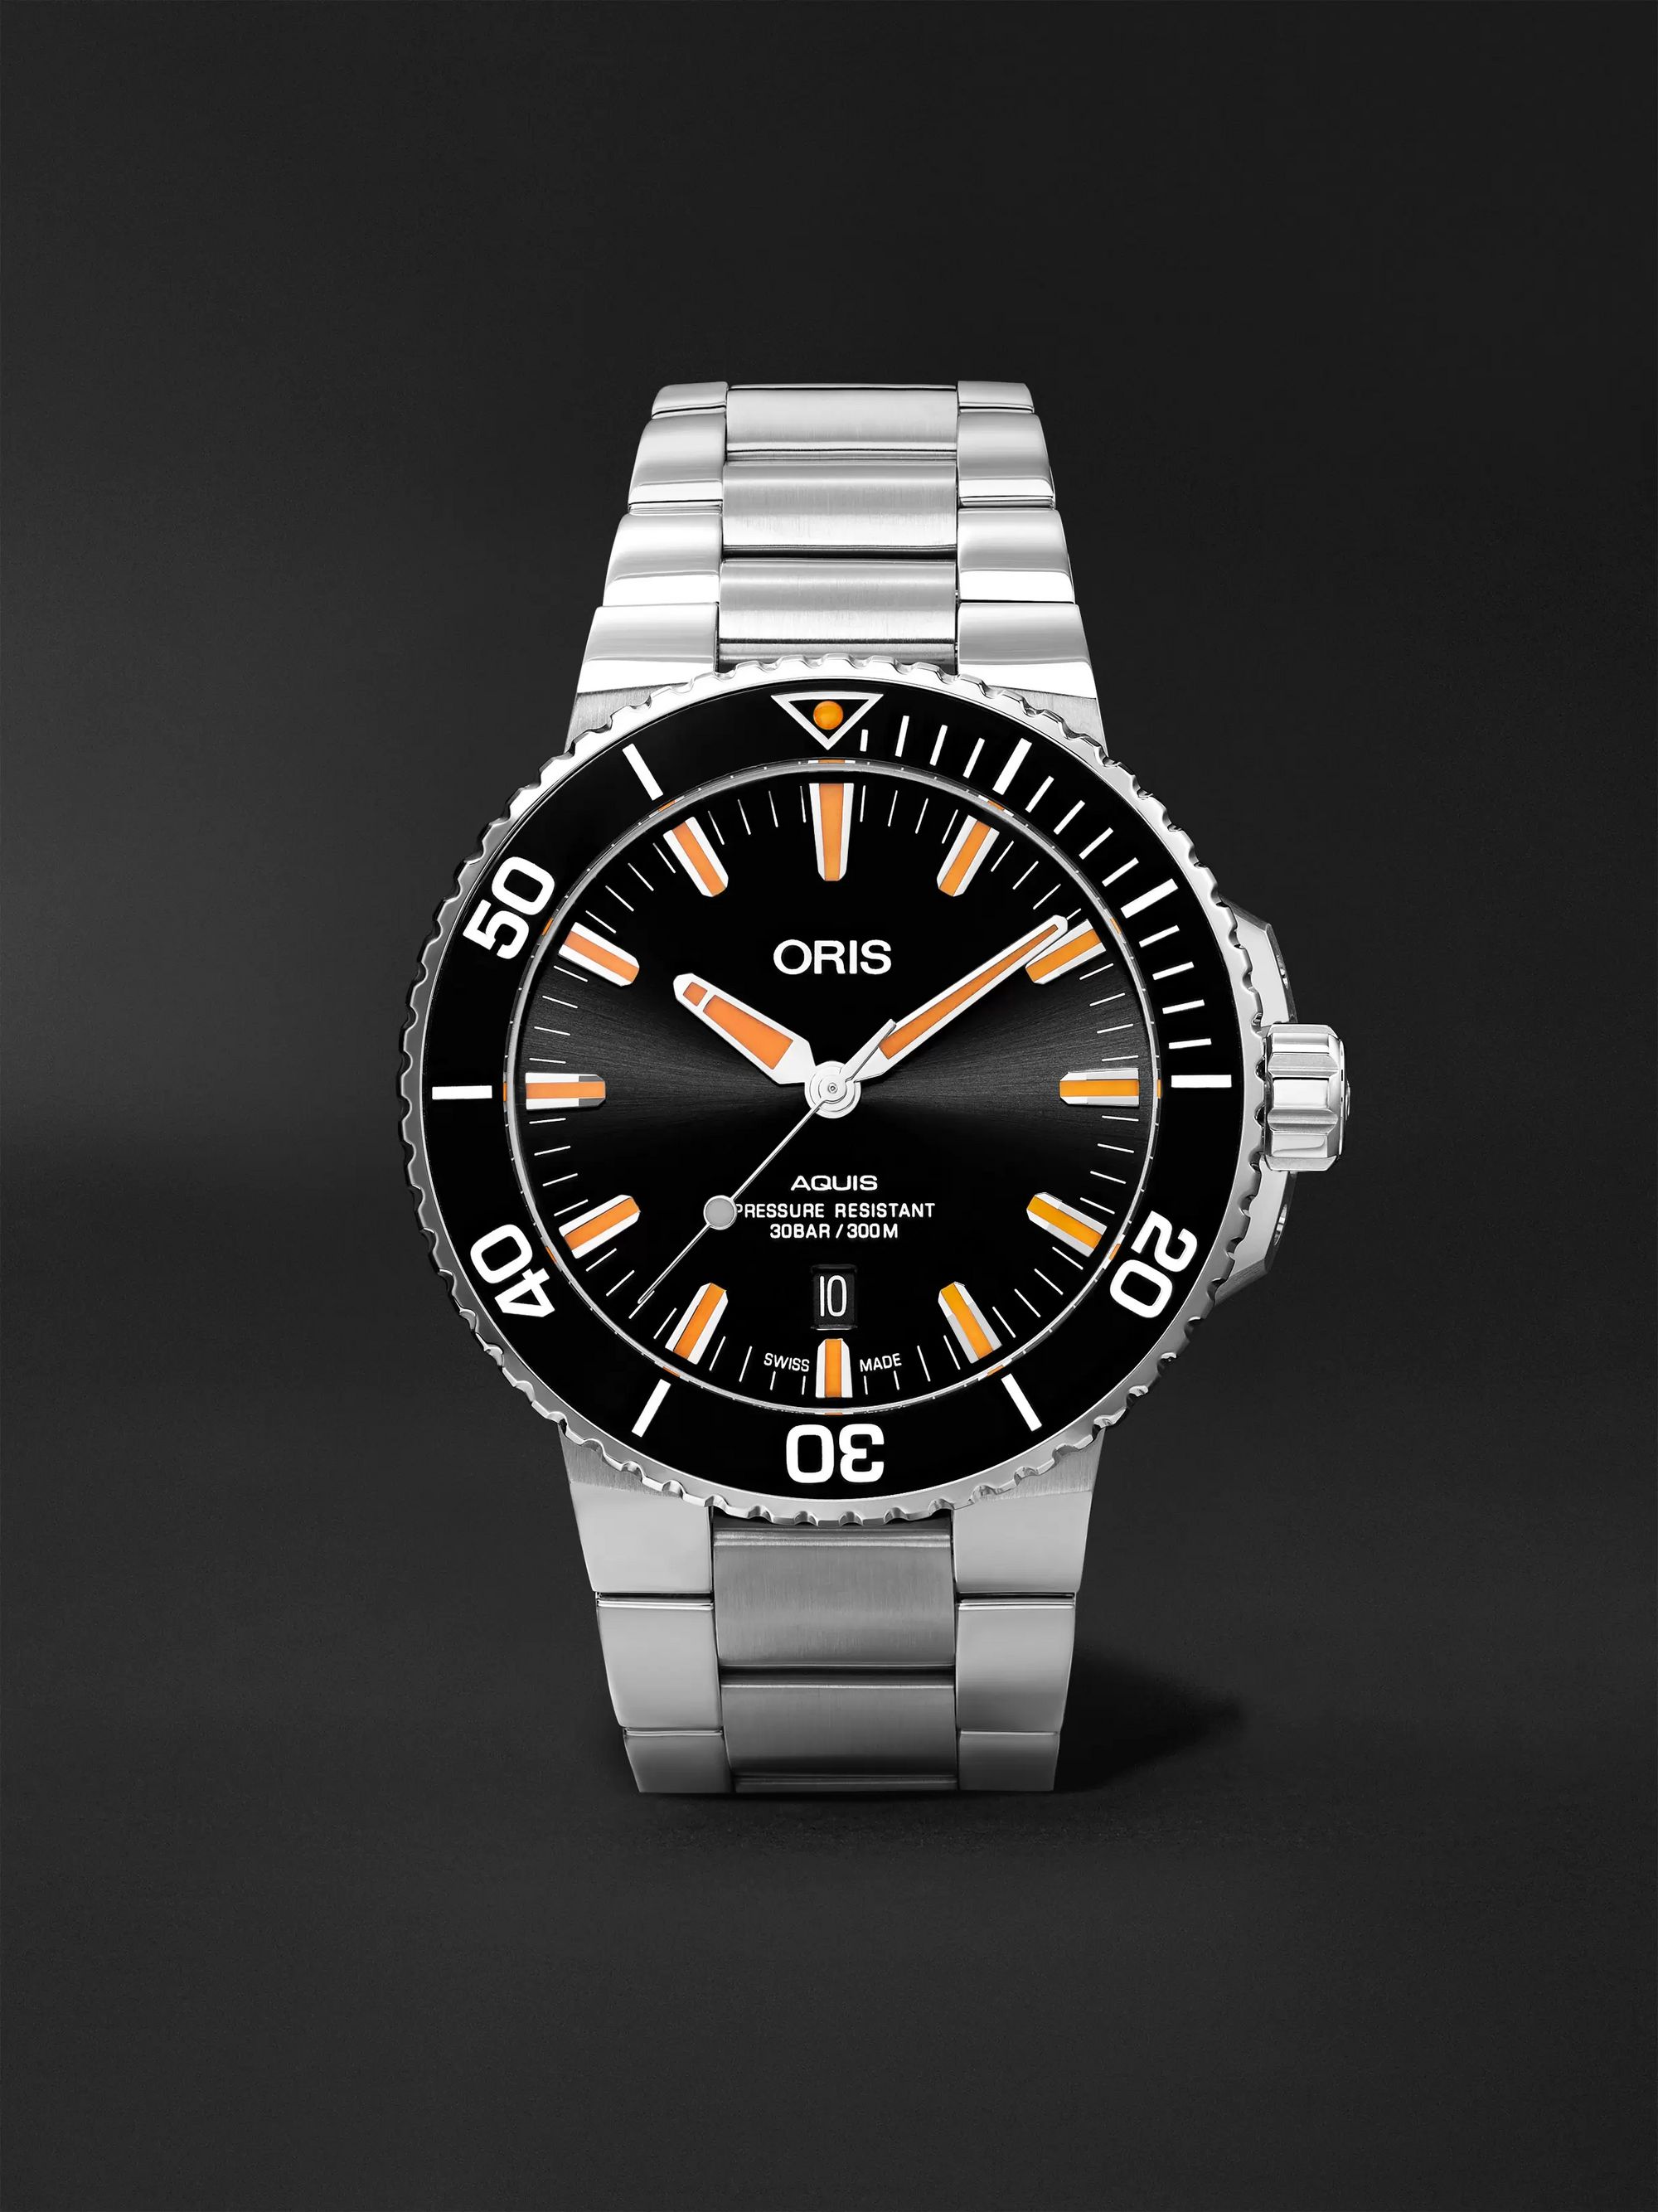 ORIS Aquis Date Automatic 43.5mm Stainless Steel Watch, Ref. No. 01 733 7730 4159-07 8 24 05PEB